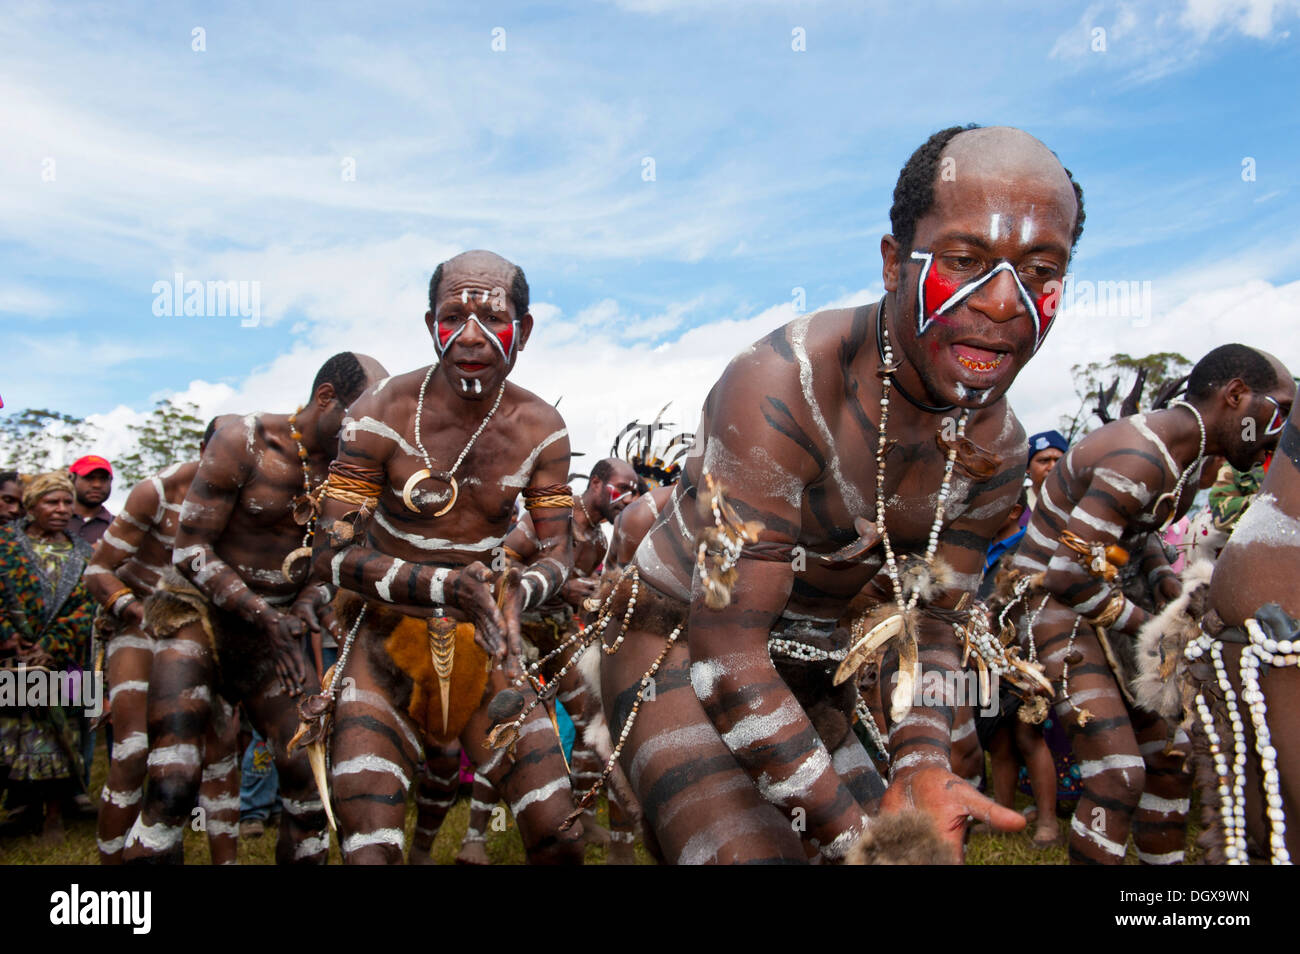 Members of a tribe with face and body paint at the traditional sing-sing gathering, Hochland, Mount Hagen Stock Photo